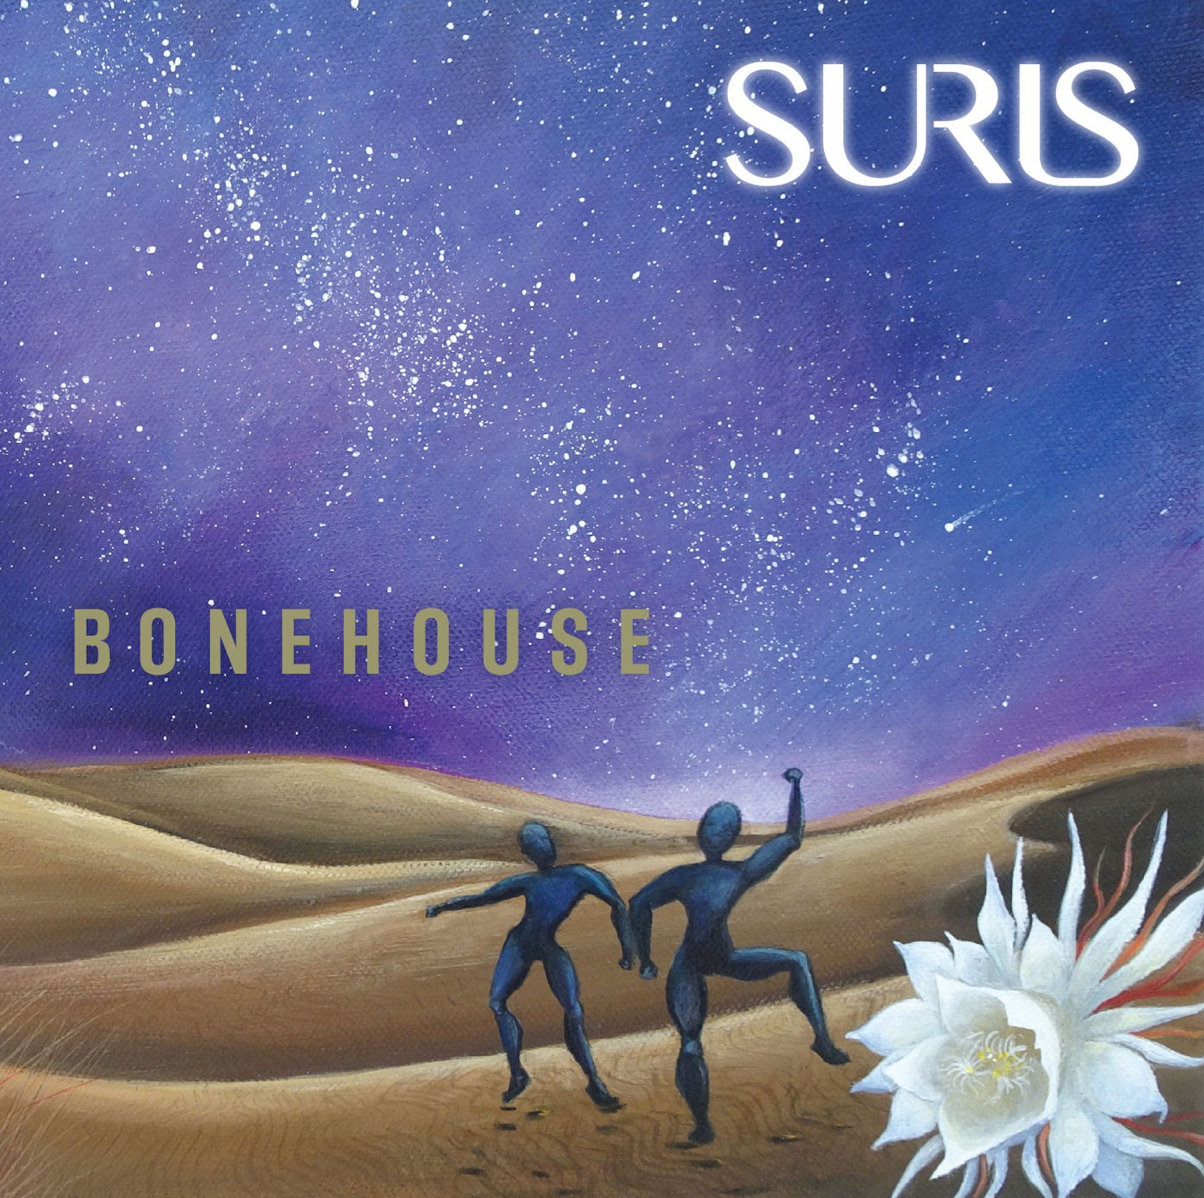 Strap yourselves in for the sonically celestial ride Suris will take you on with their psych-folk album, ‘Bonehouse’.